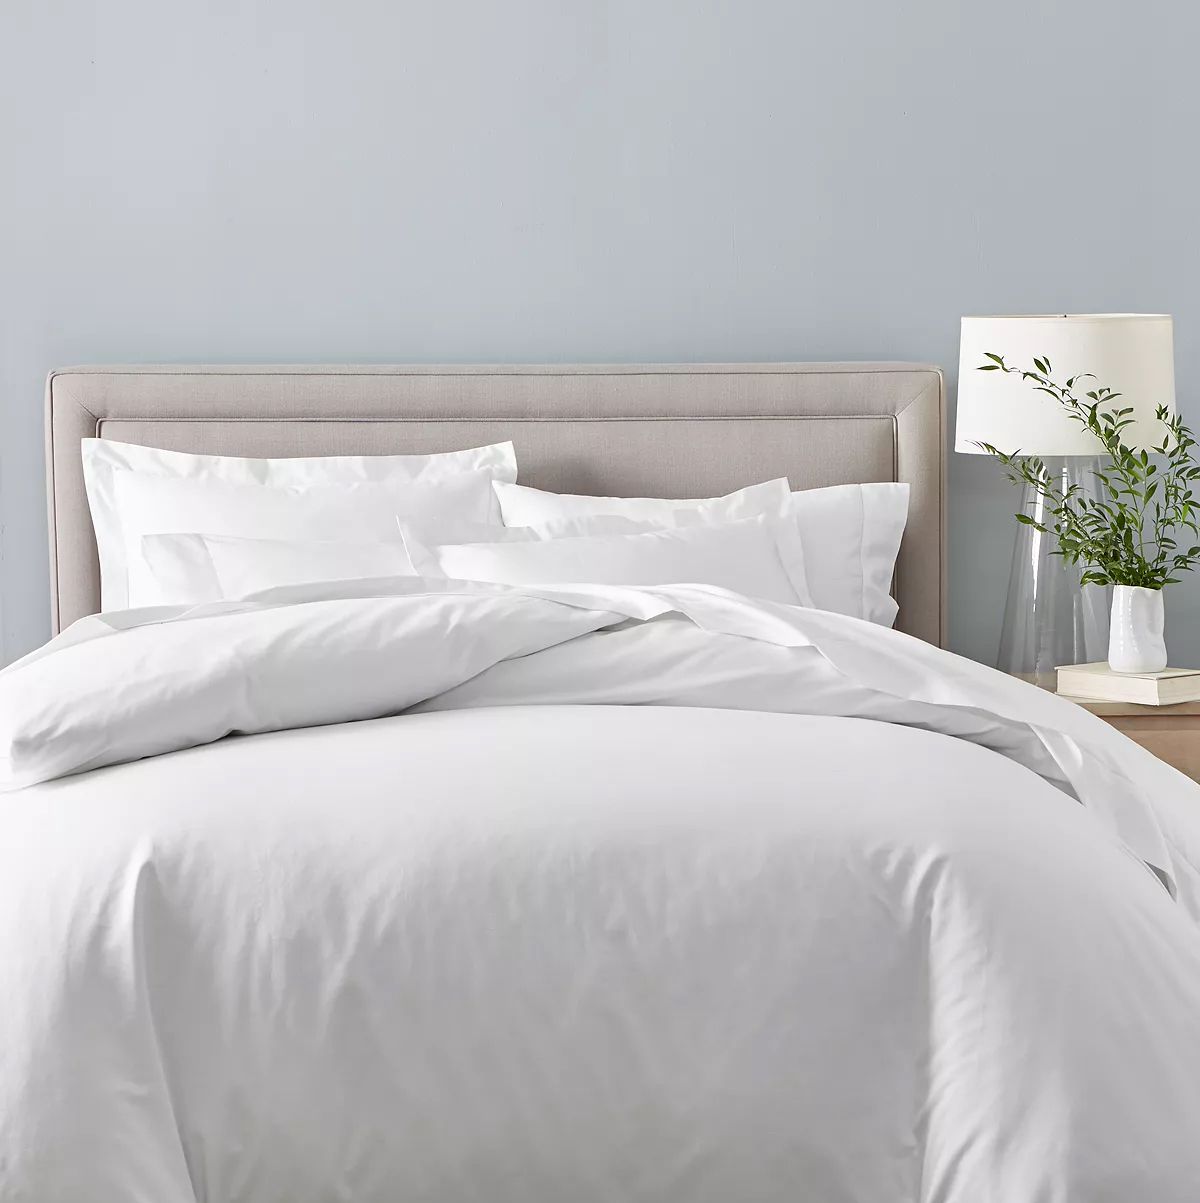 This Under-$50 Bedding Sale Is Too Great to Miss